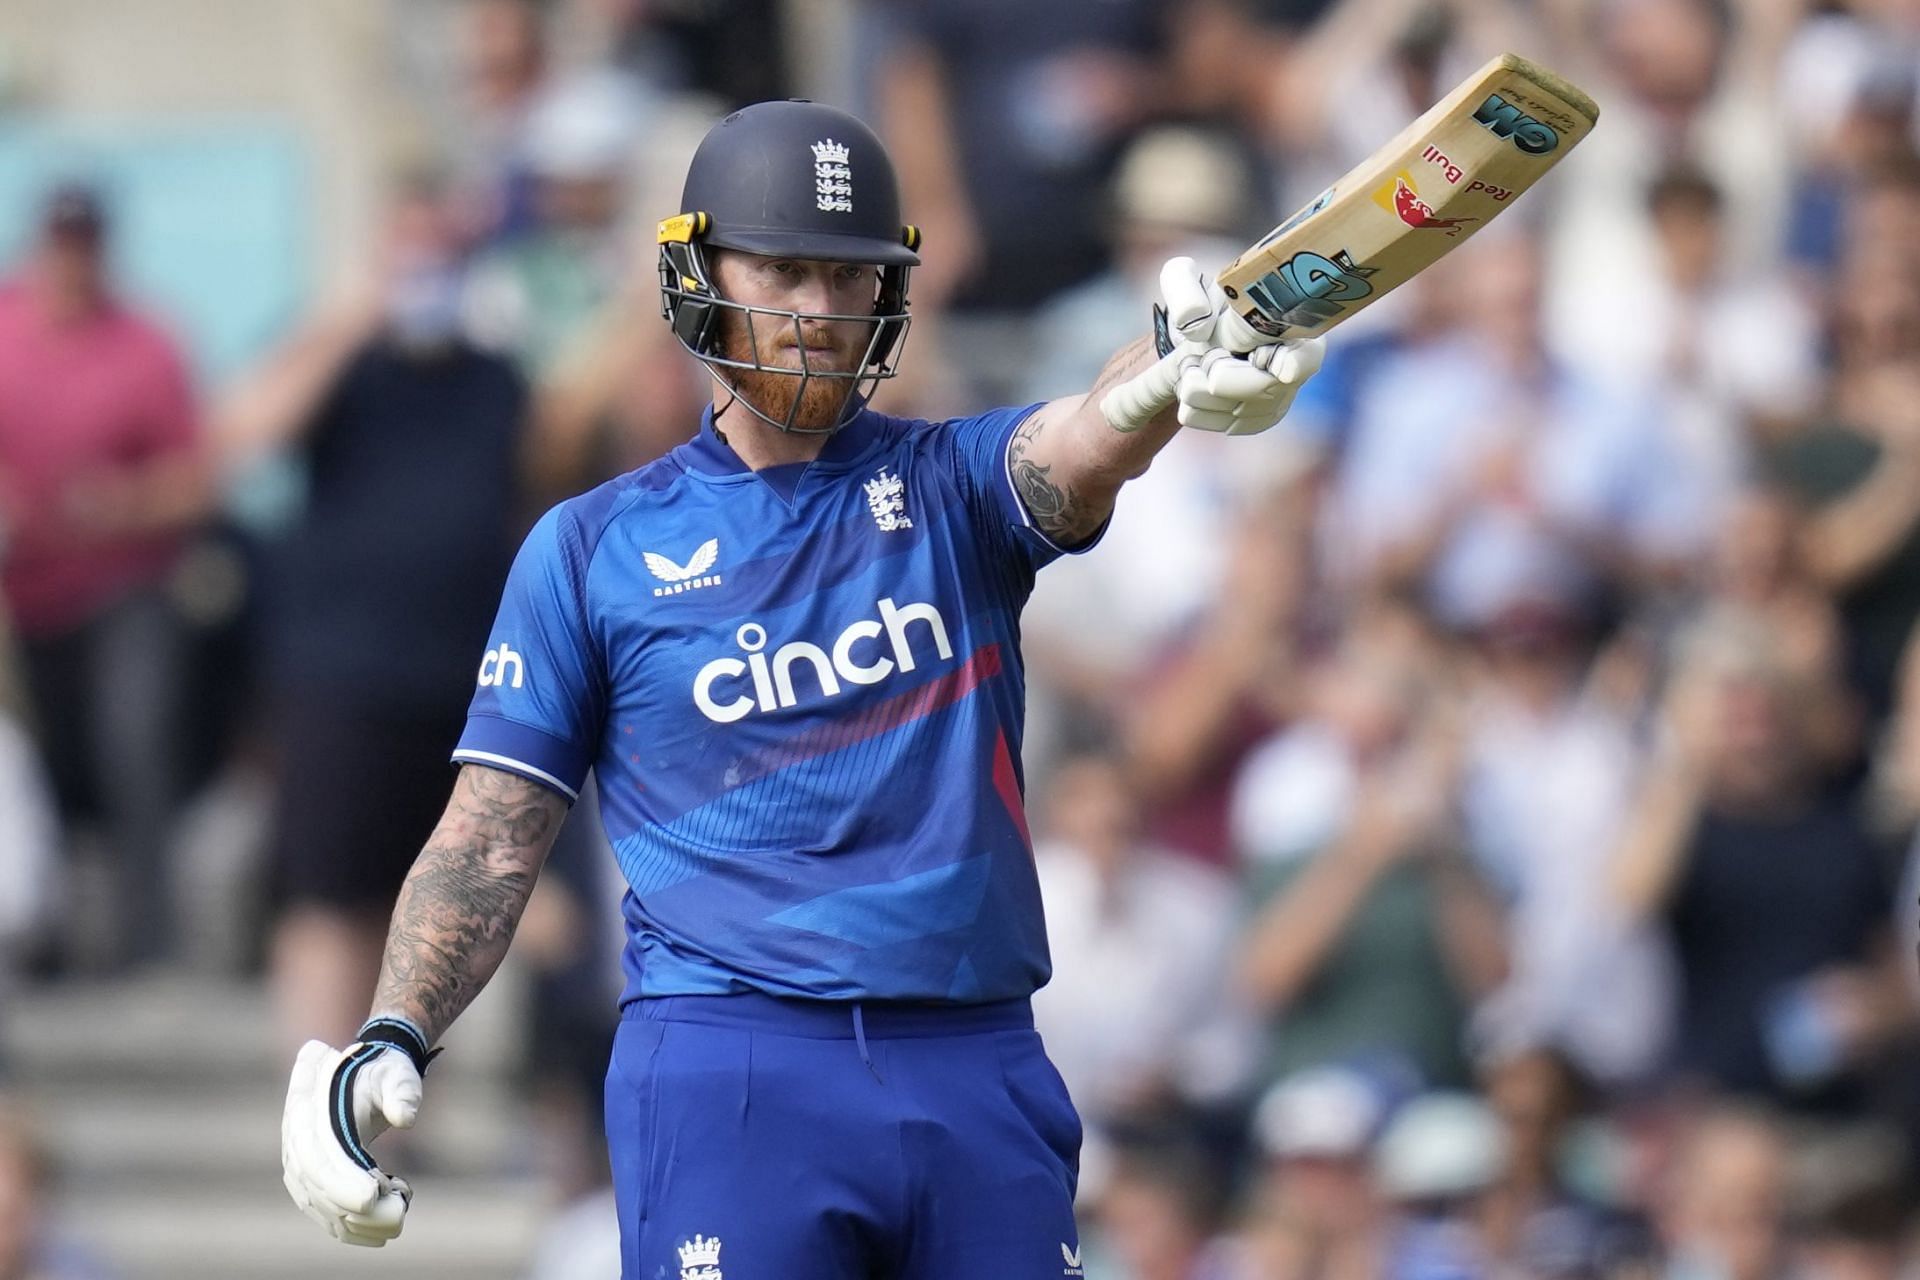 Ben Stokes is known for elevating his game in pressure situations. [P/C: AP]